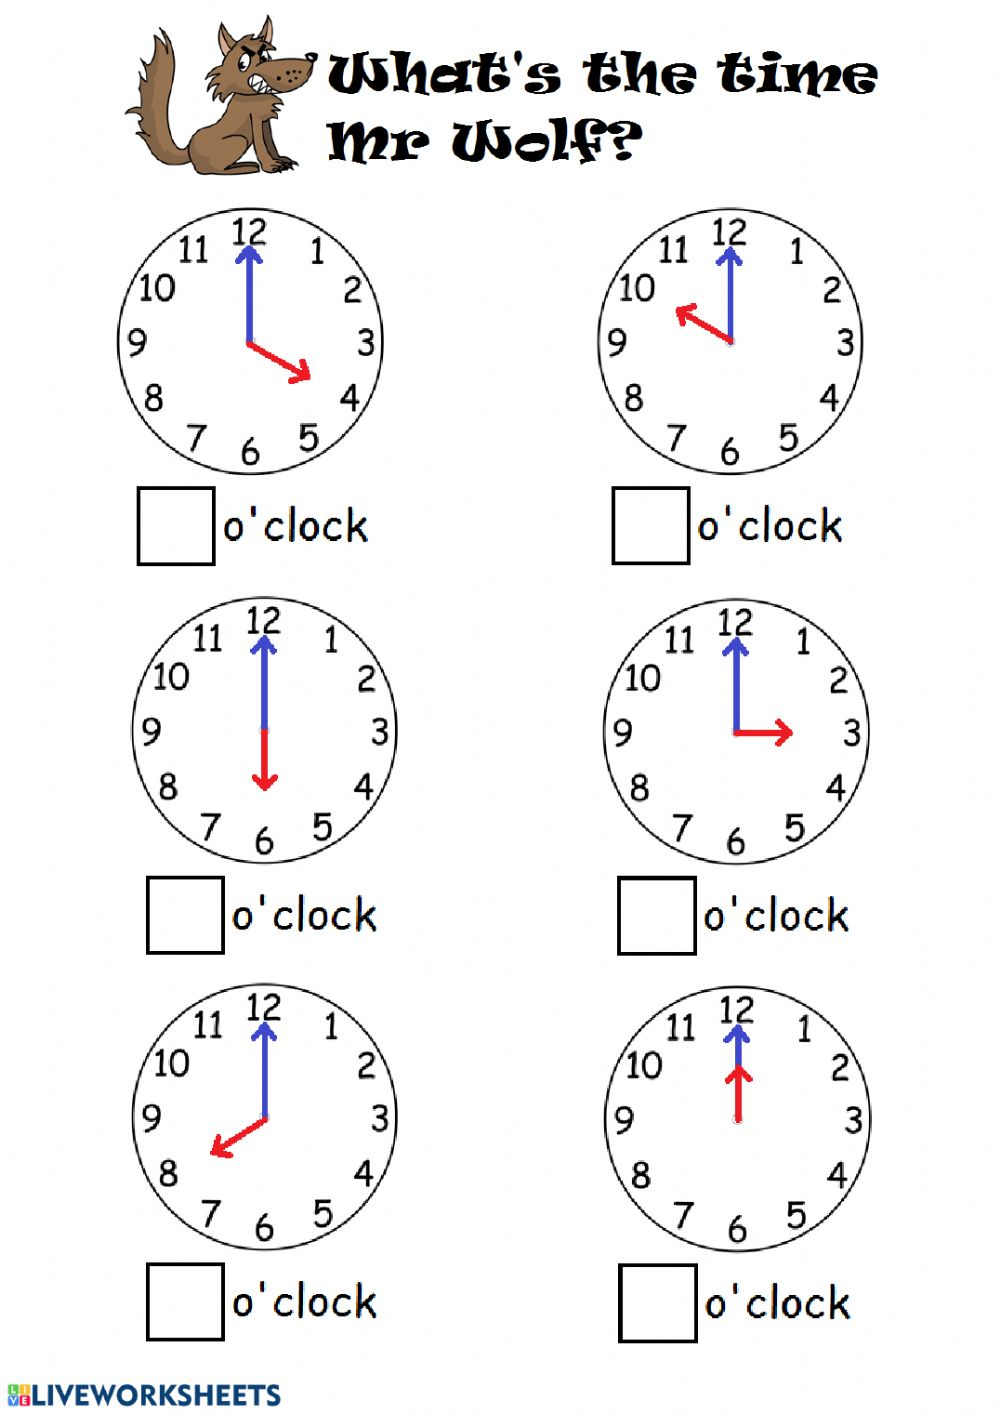 Worksheet On Telling Time To The Hour